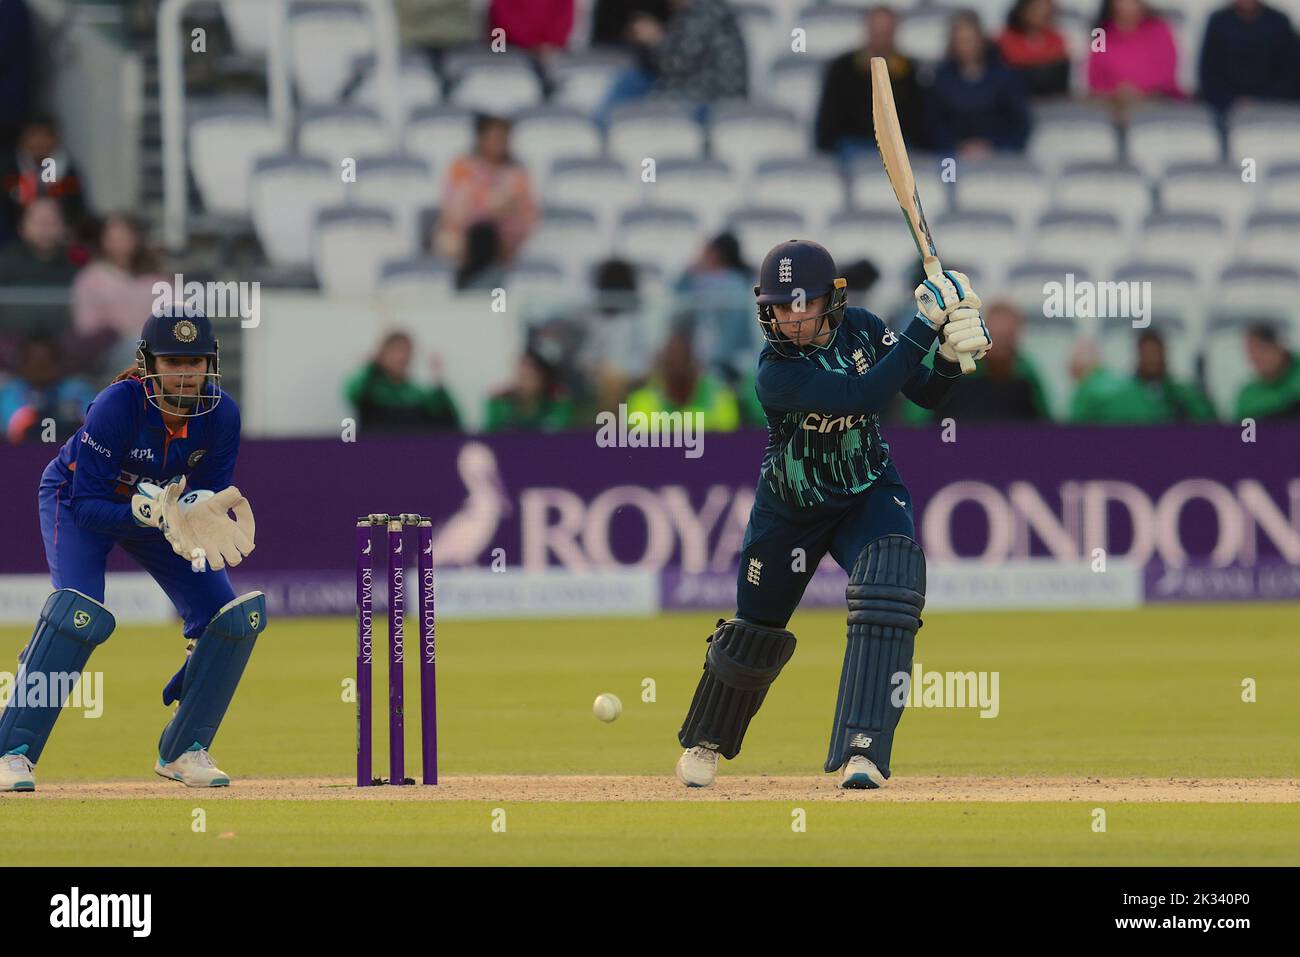 24 September , 2022, London, UK. England’s Kate Cross batting batting as England women take on India in the 3rd Royal London One Day International at Lords. David Rowe/Alamy Live News. Stock Photo